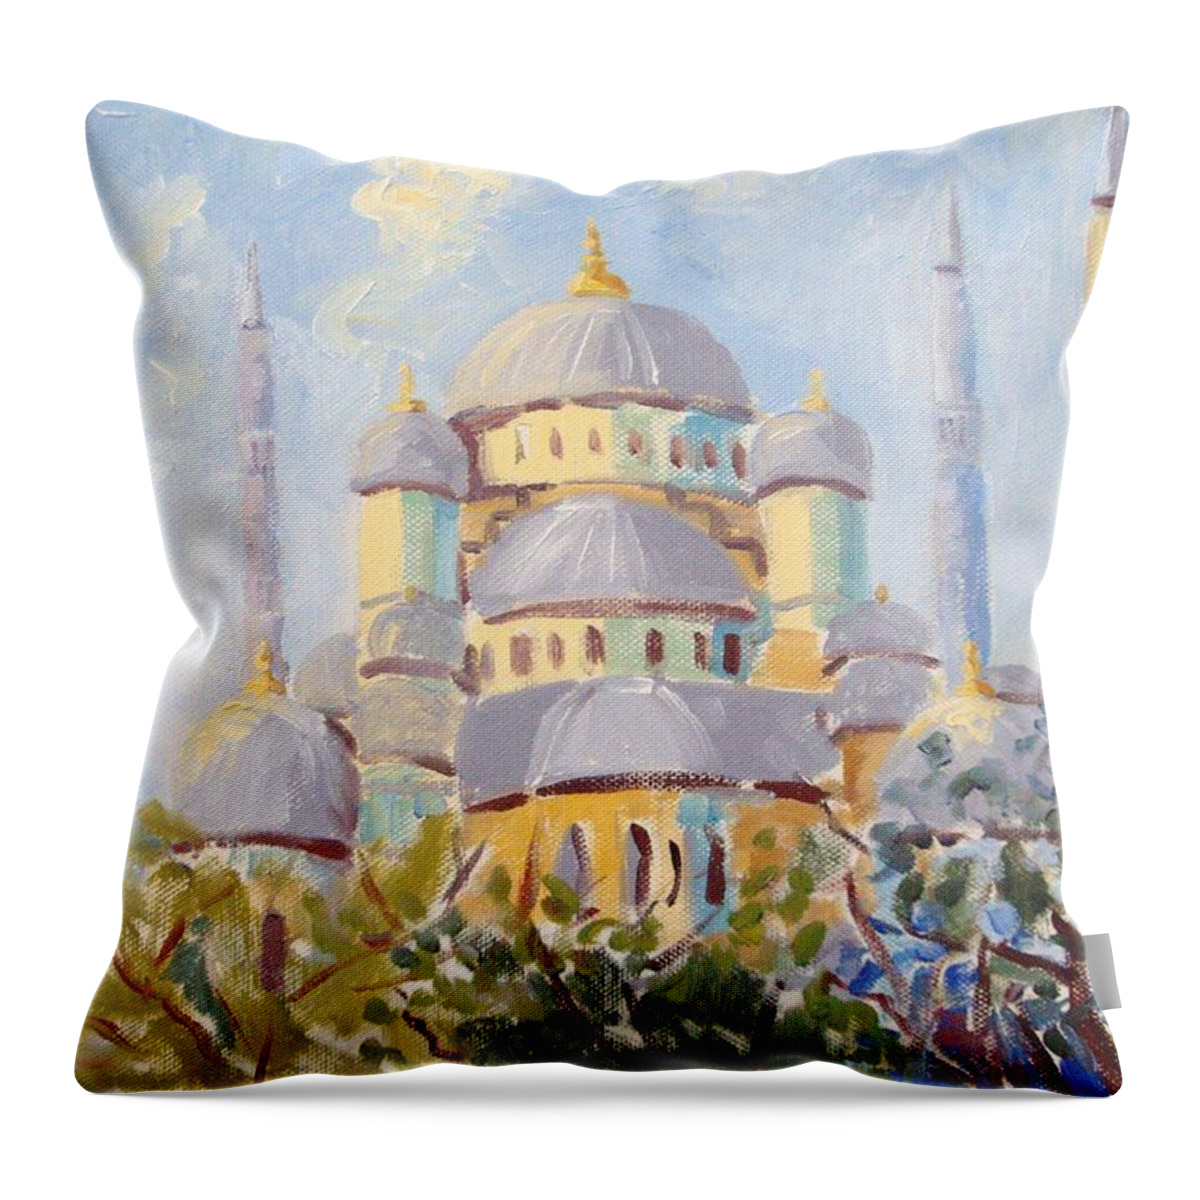  Cerulean Sky Throw Pillow featuring the painting Blue Mosque Istanbul by Elinor Fletcher